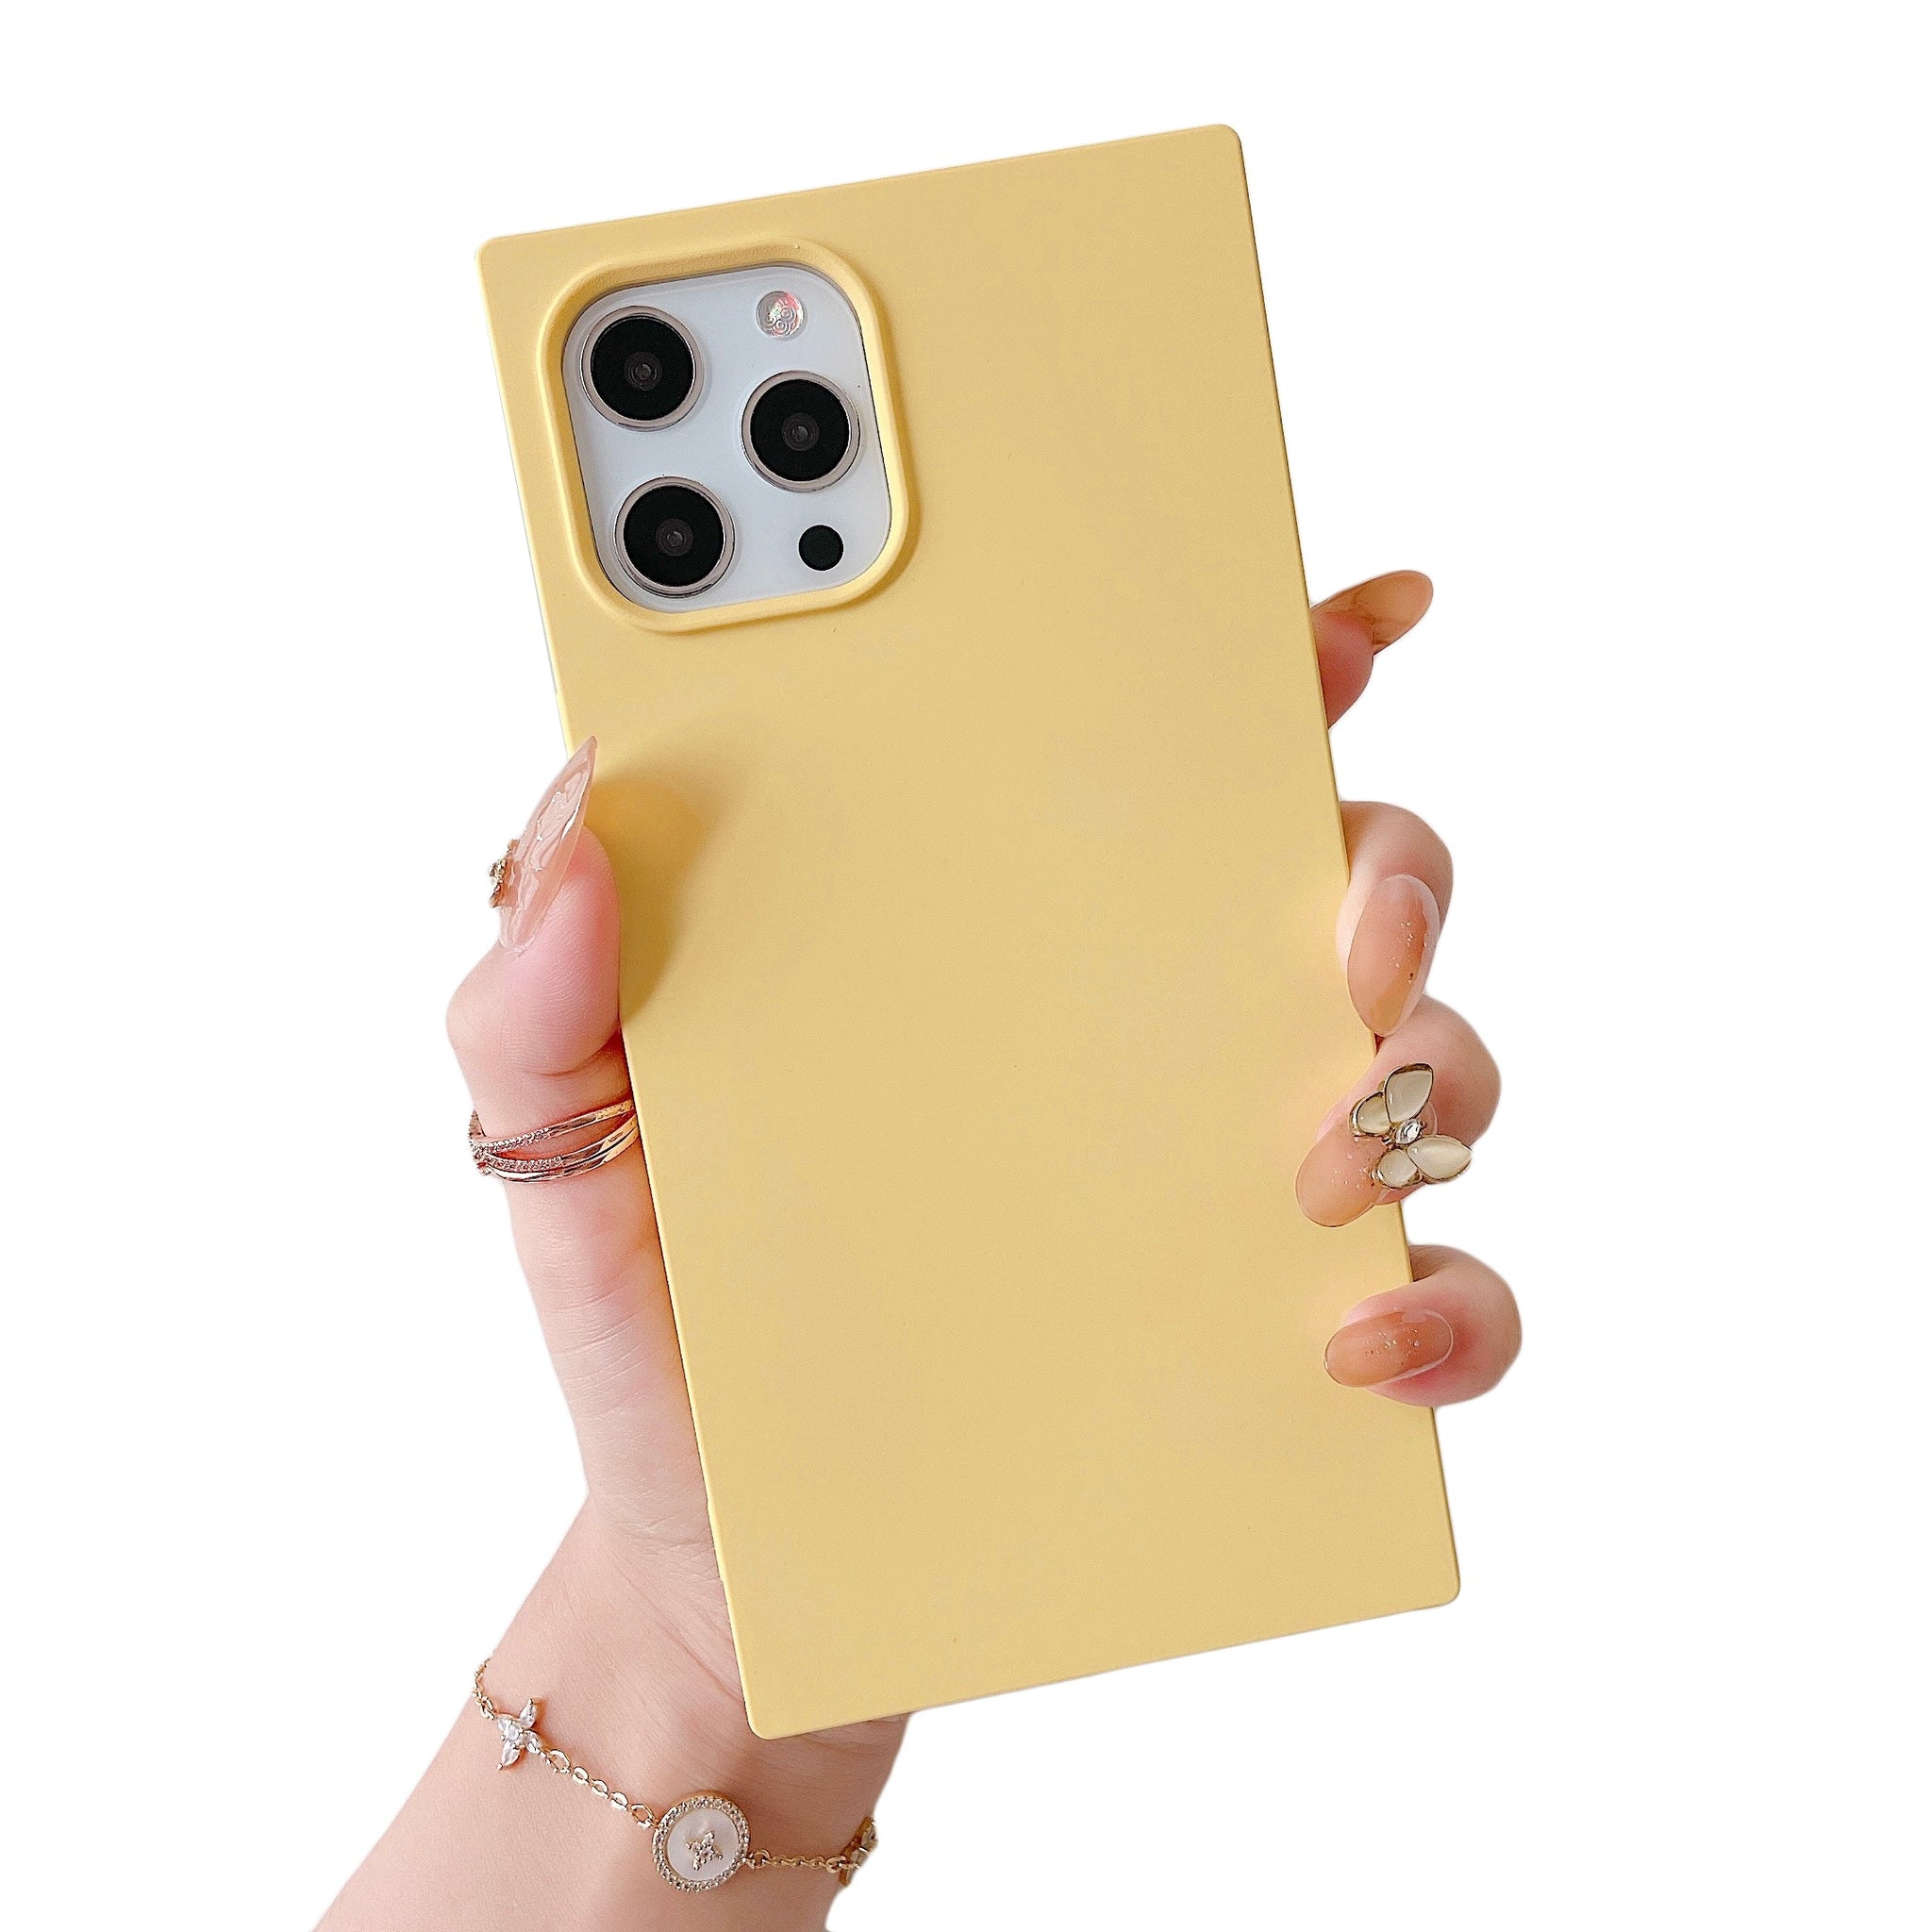 iPhone 11 Case Square Silicone (Yellow)